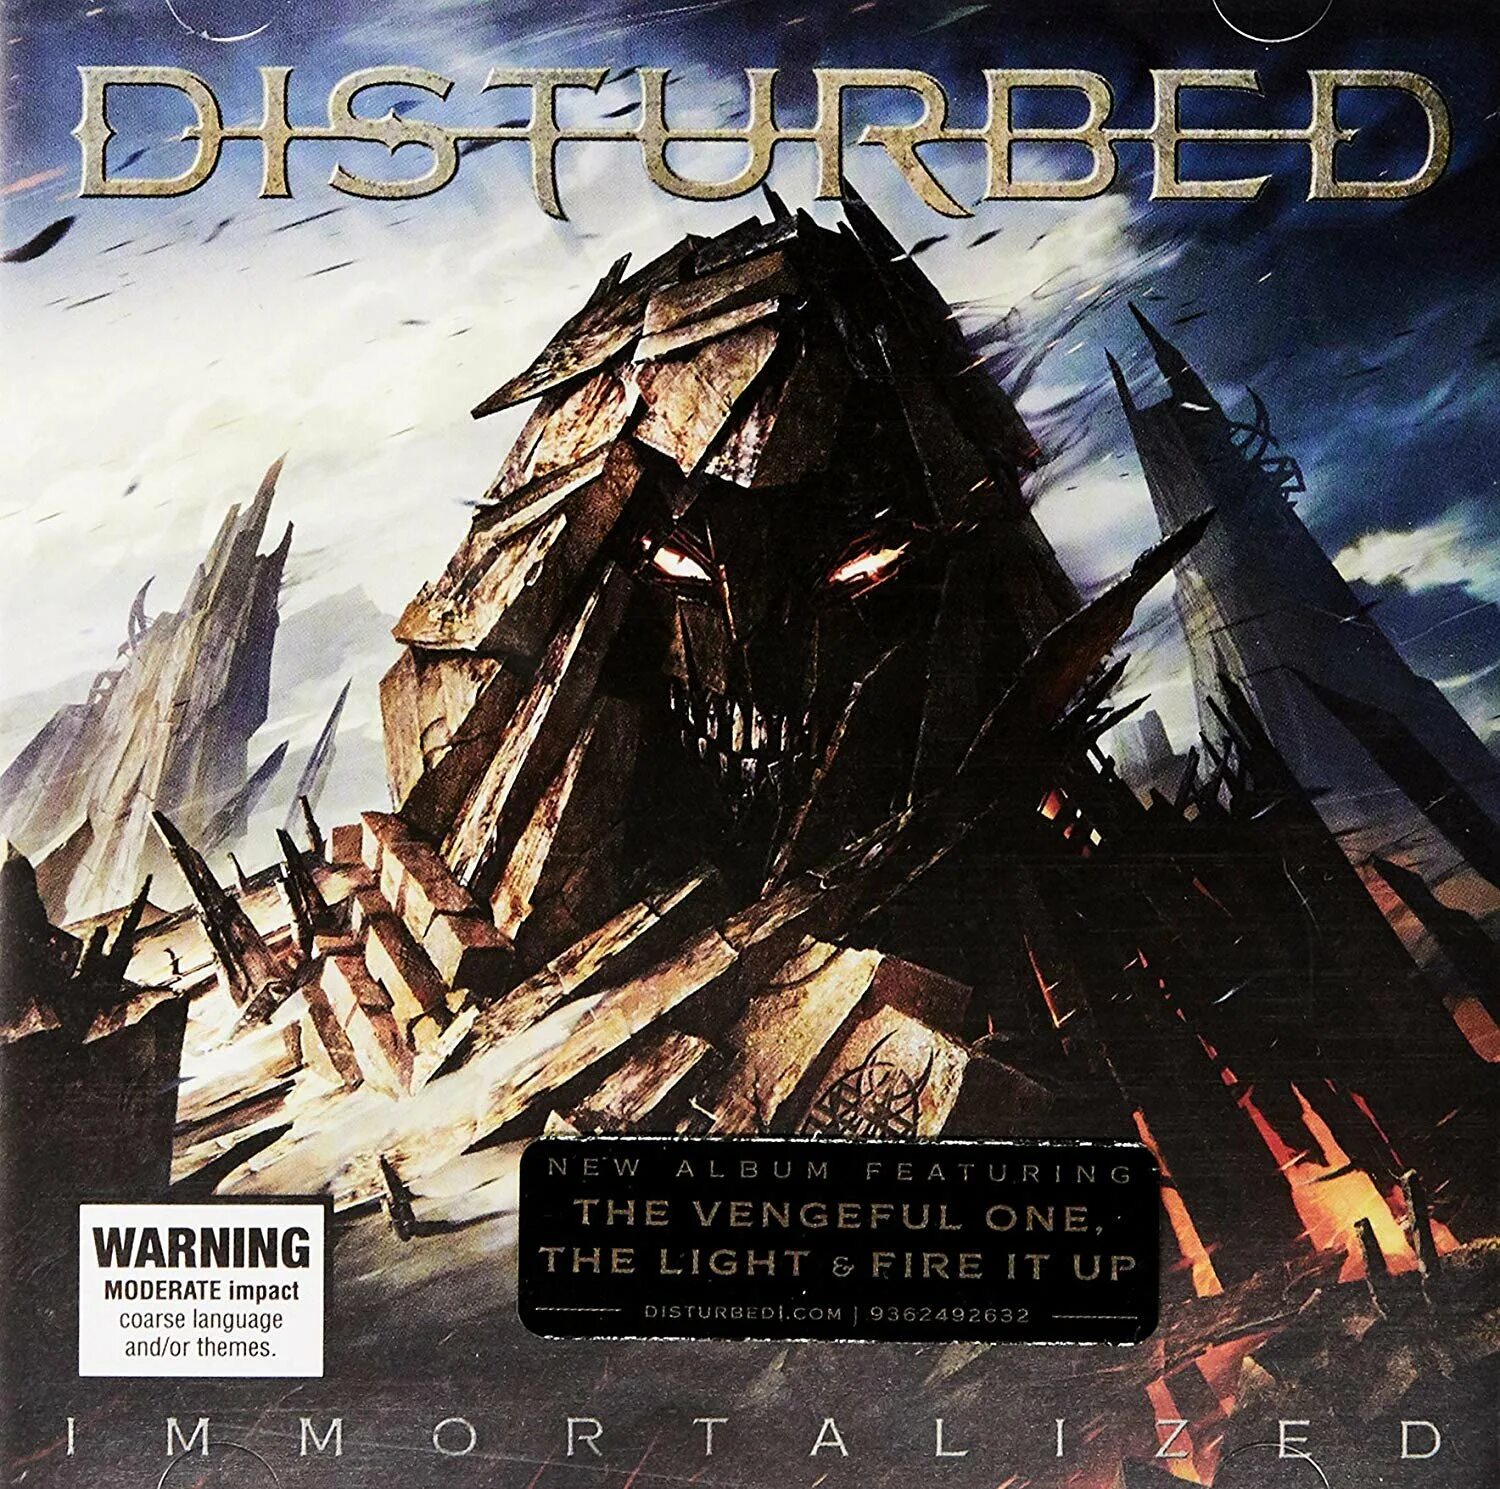 Disturbed the sound of silence текст. Disturbed immortalized обложка. Disturbed immortalized обои. Disturbed дискография диск. Disturbed 2015 immortalized Japan.